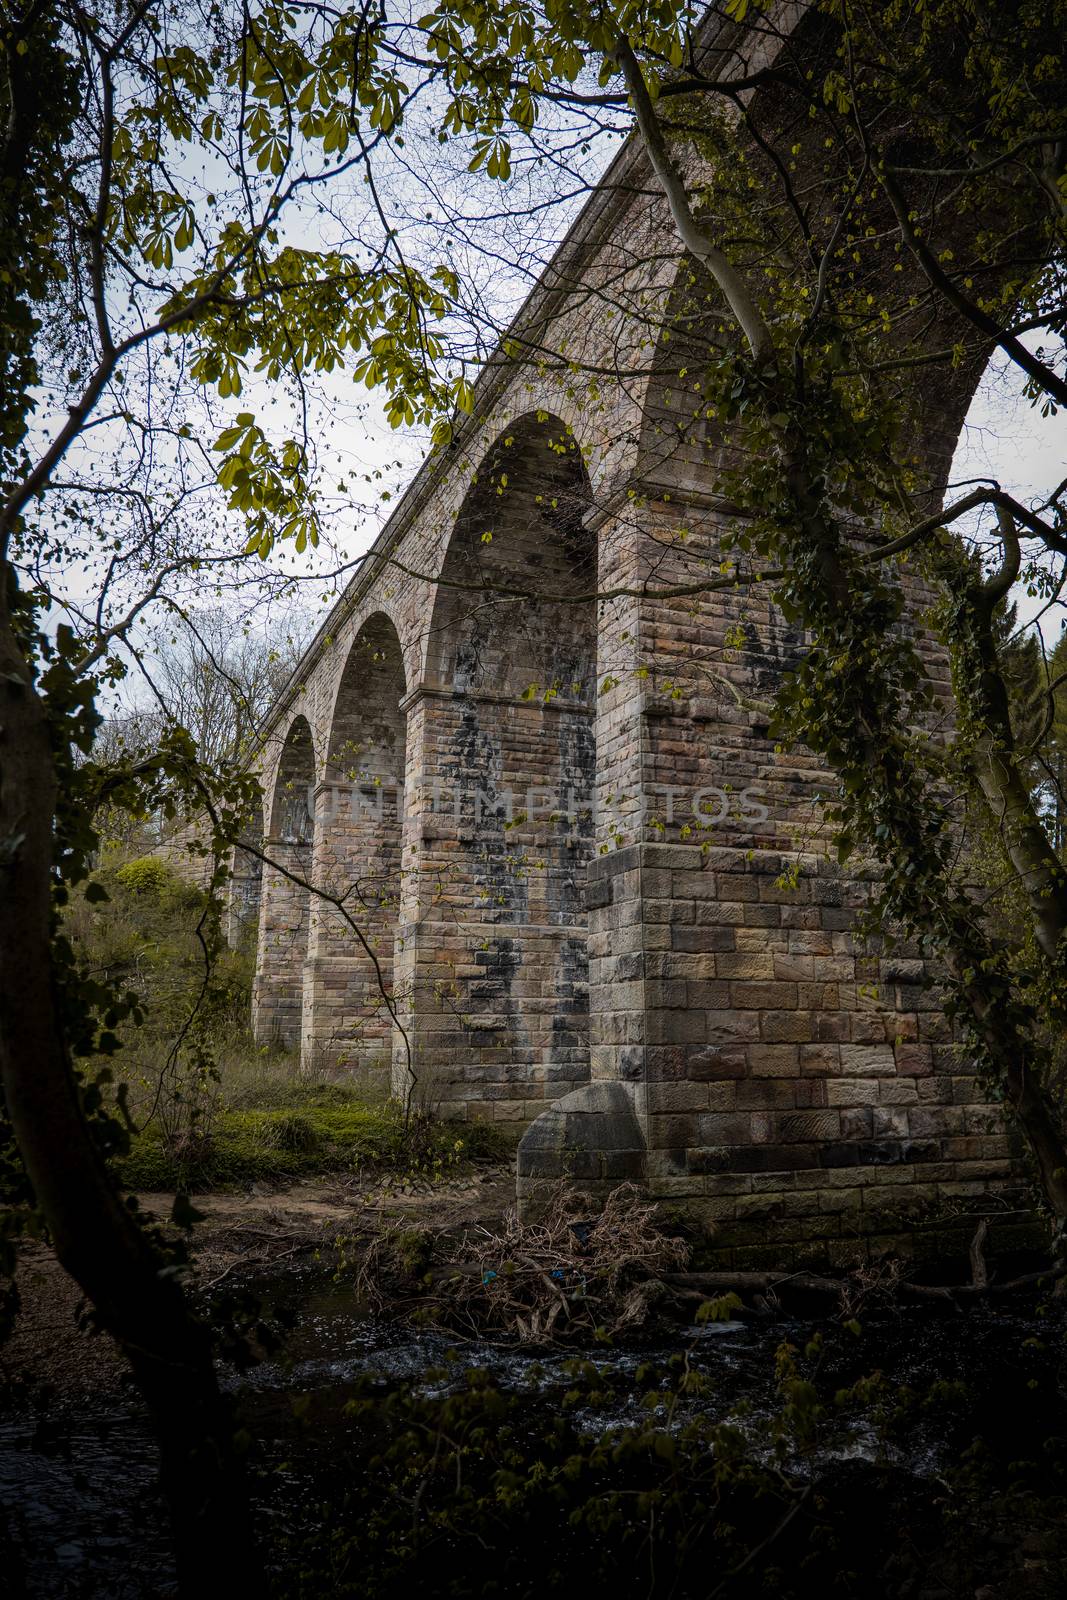 An old stone built British viaduct in the Yorkshire countryside